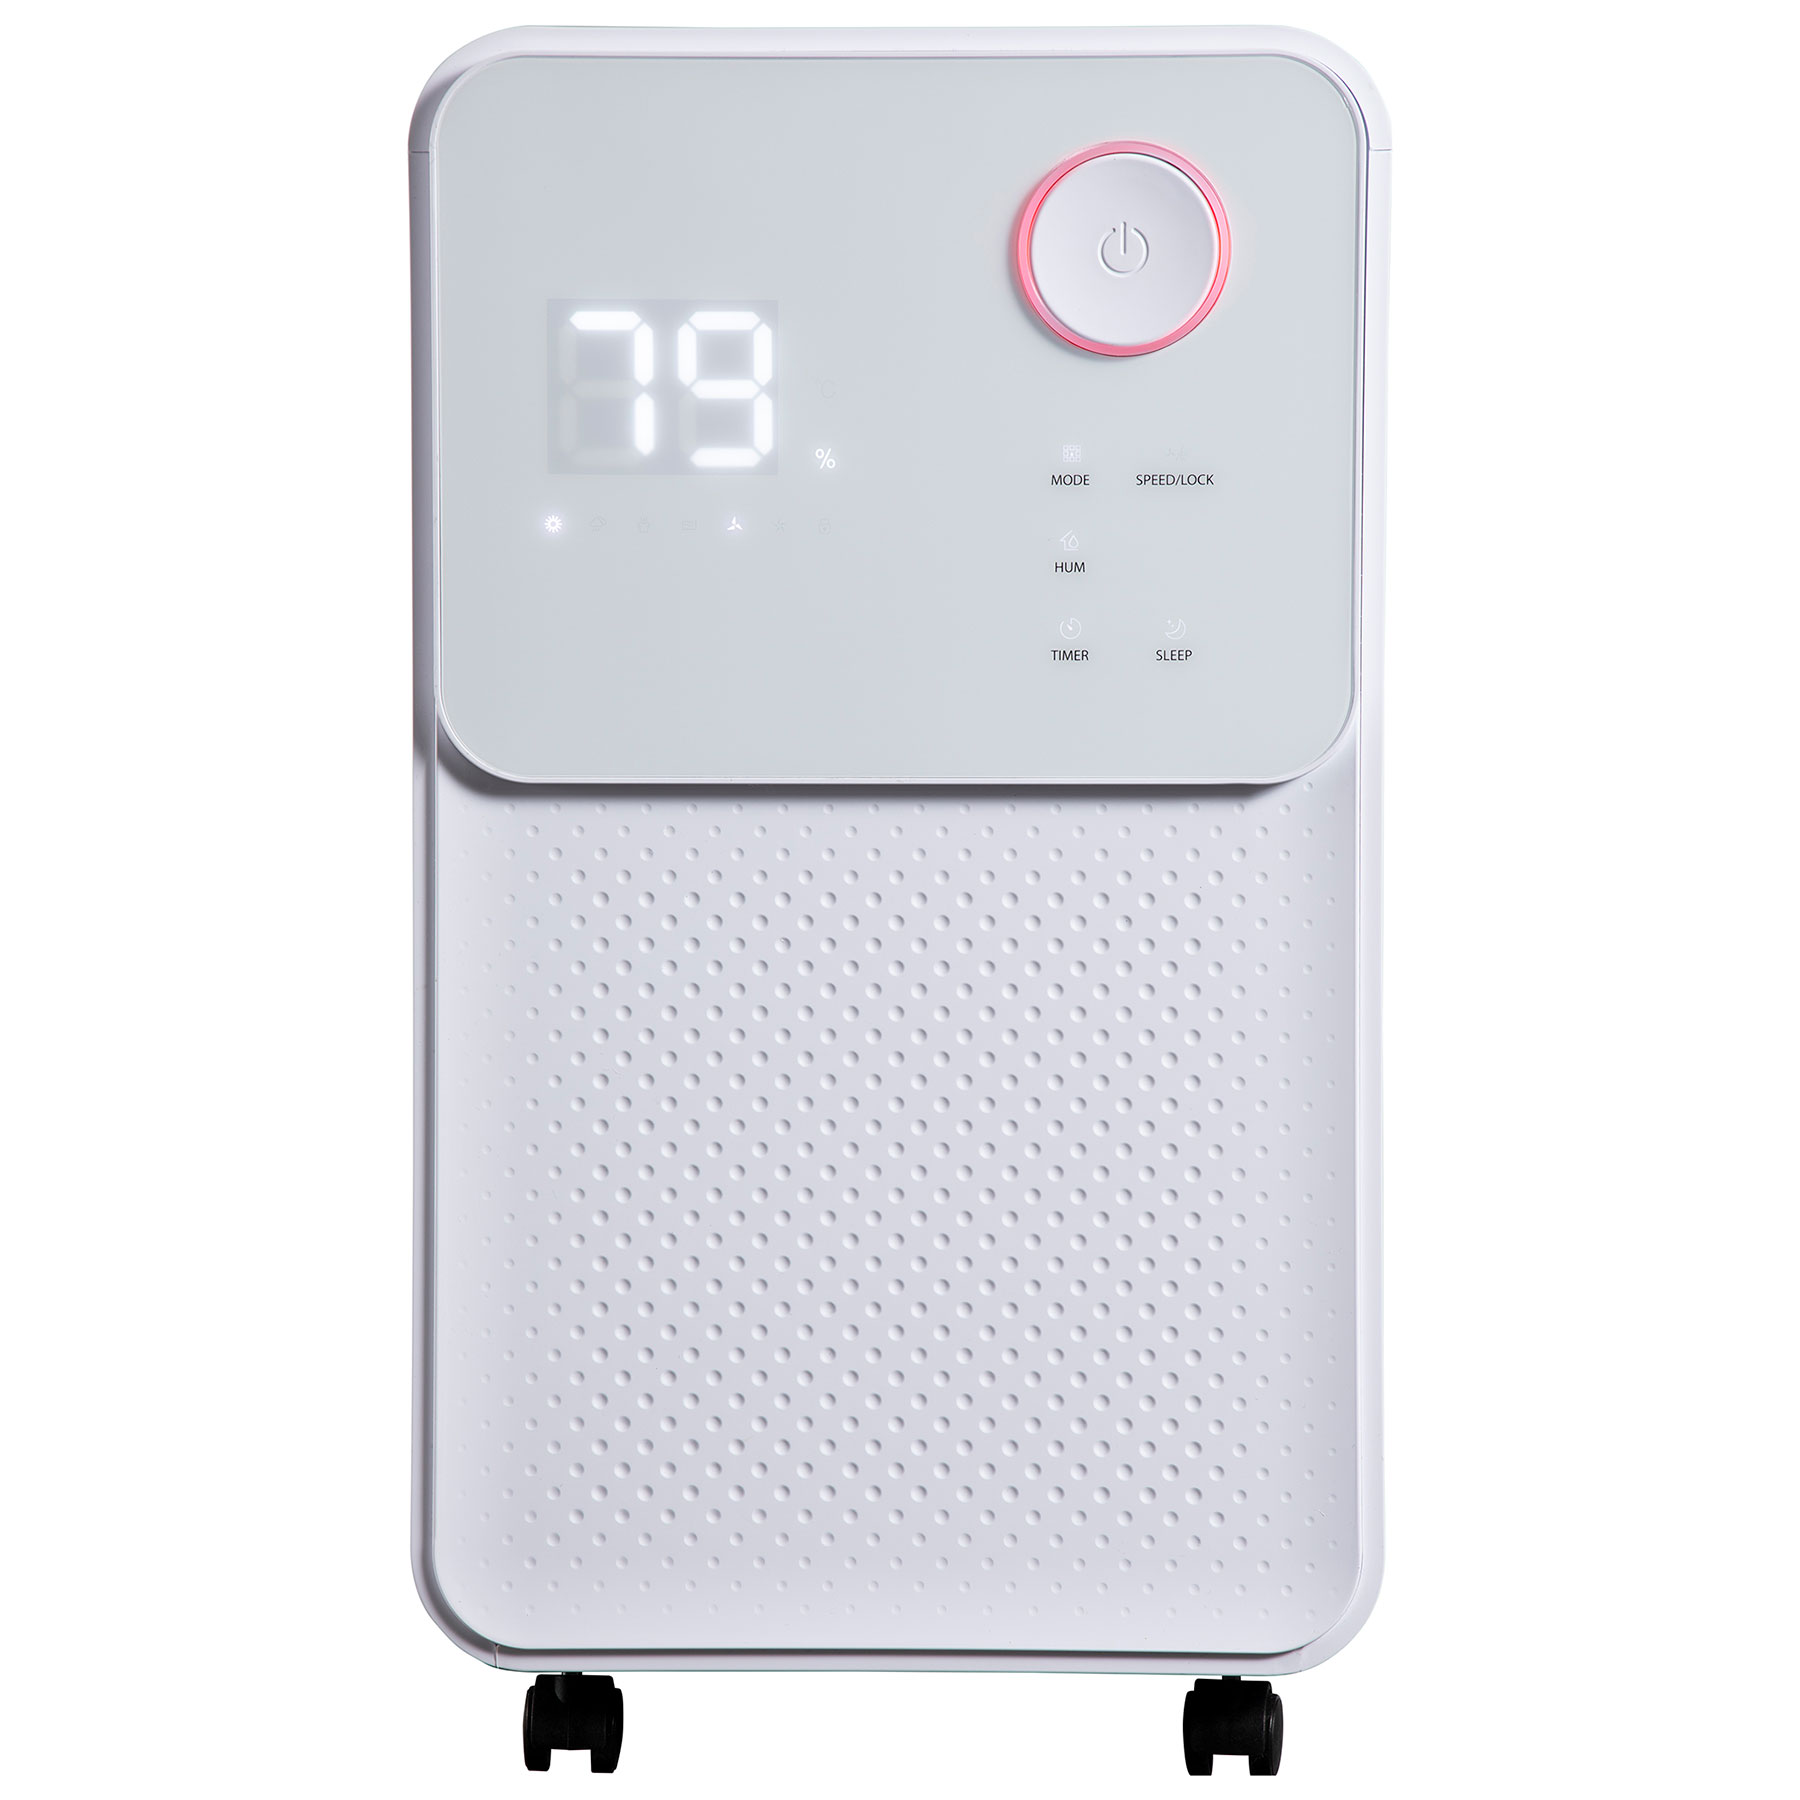 Image of Daewoo COL1587GE 16L Dehumidifier in White 24hr Timer